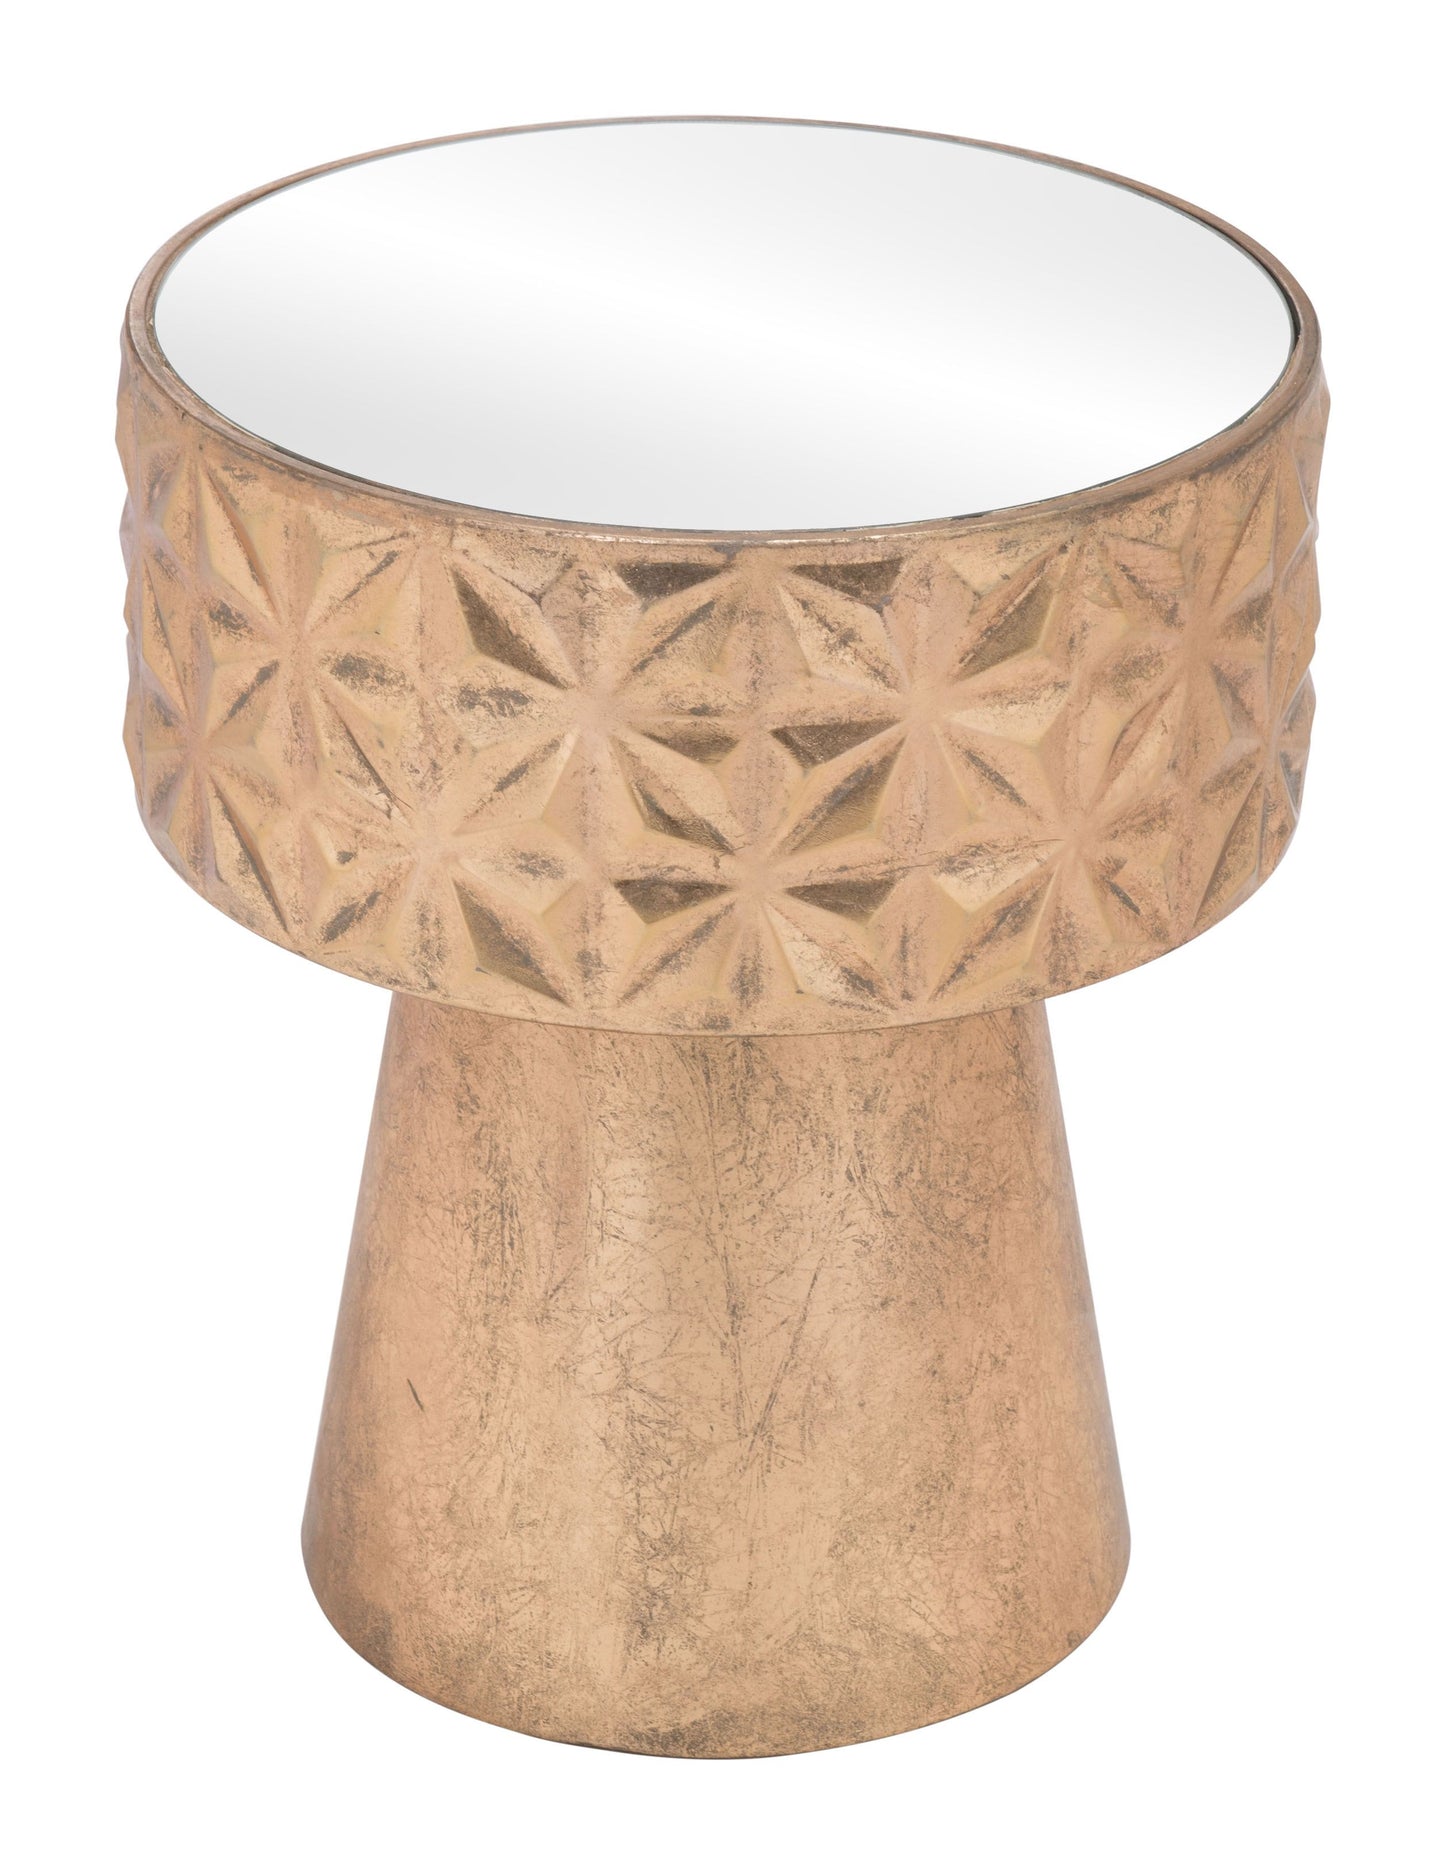 Aztec Side Table Gold